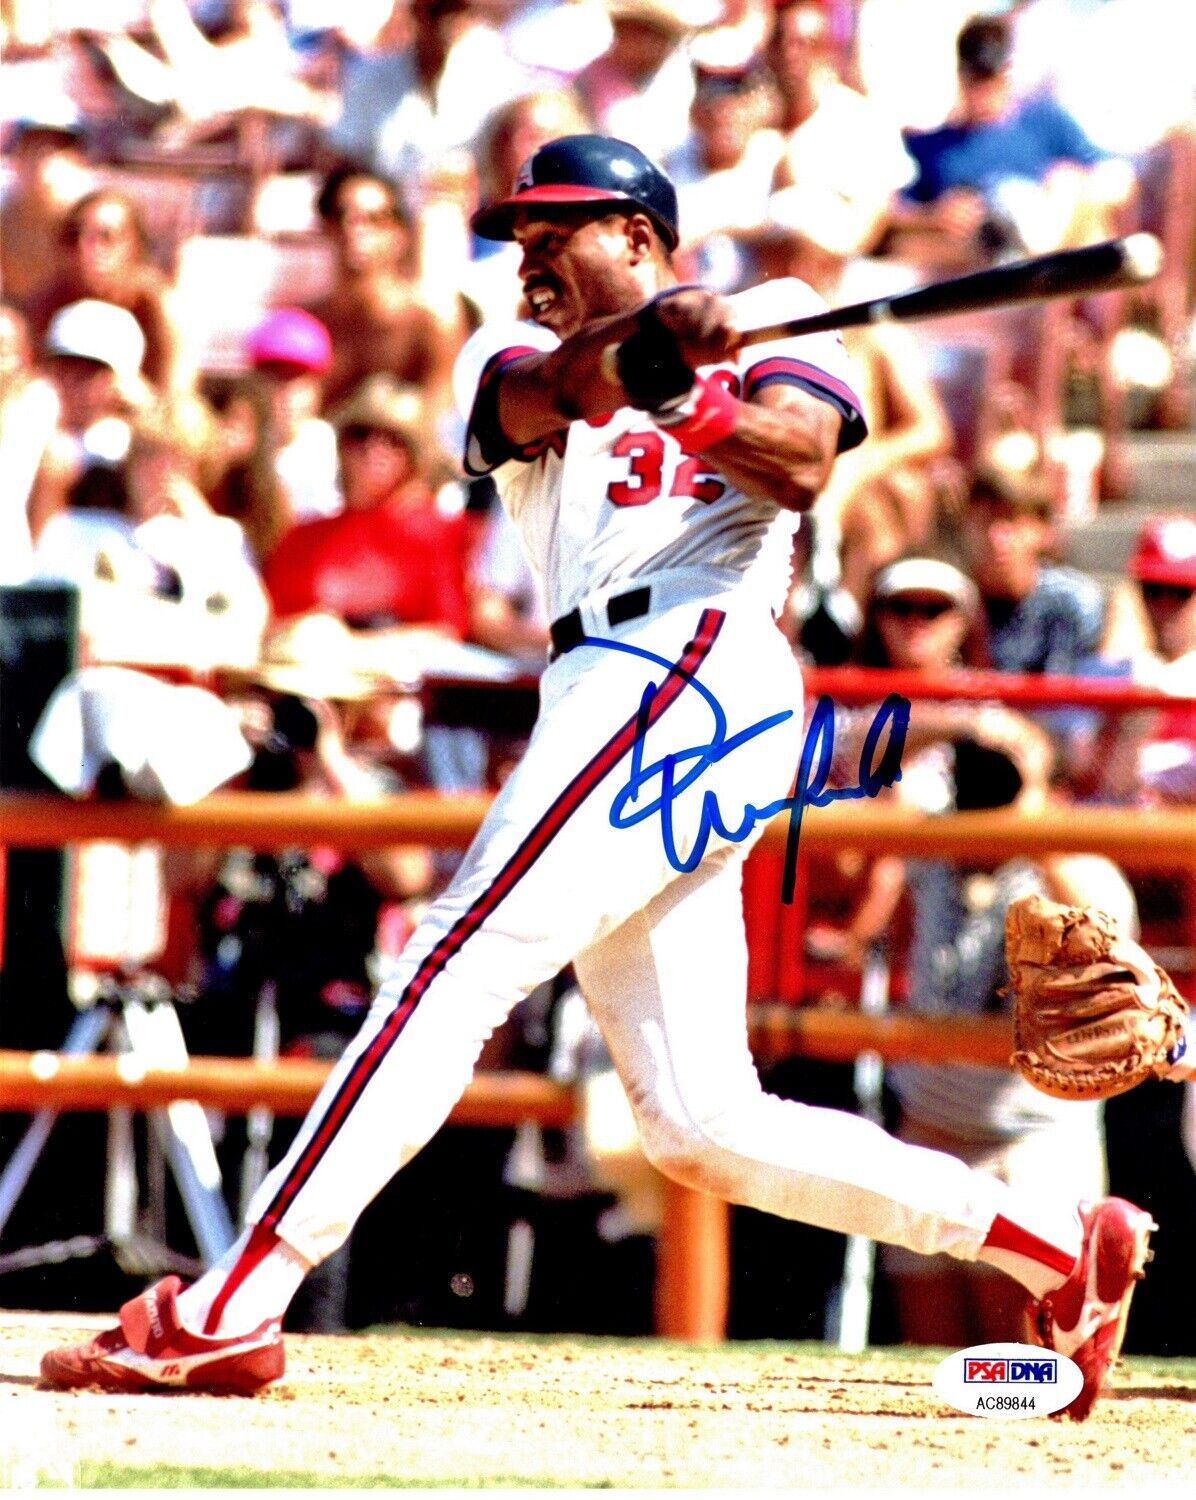 Dave Winfield Signed Autographed California Angels 8x10 inch Photo Poster painting + PSA/DNA COA